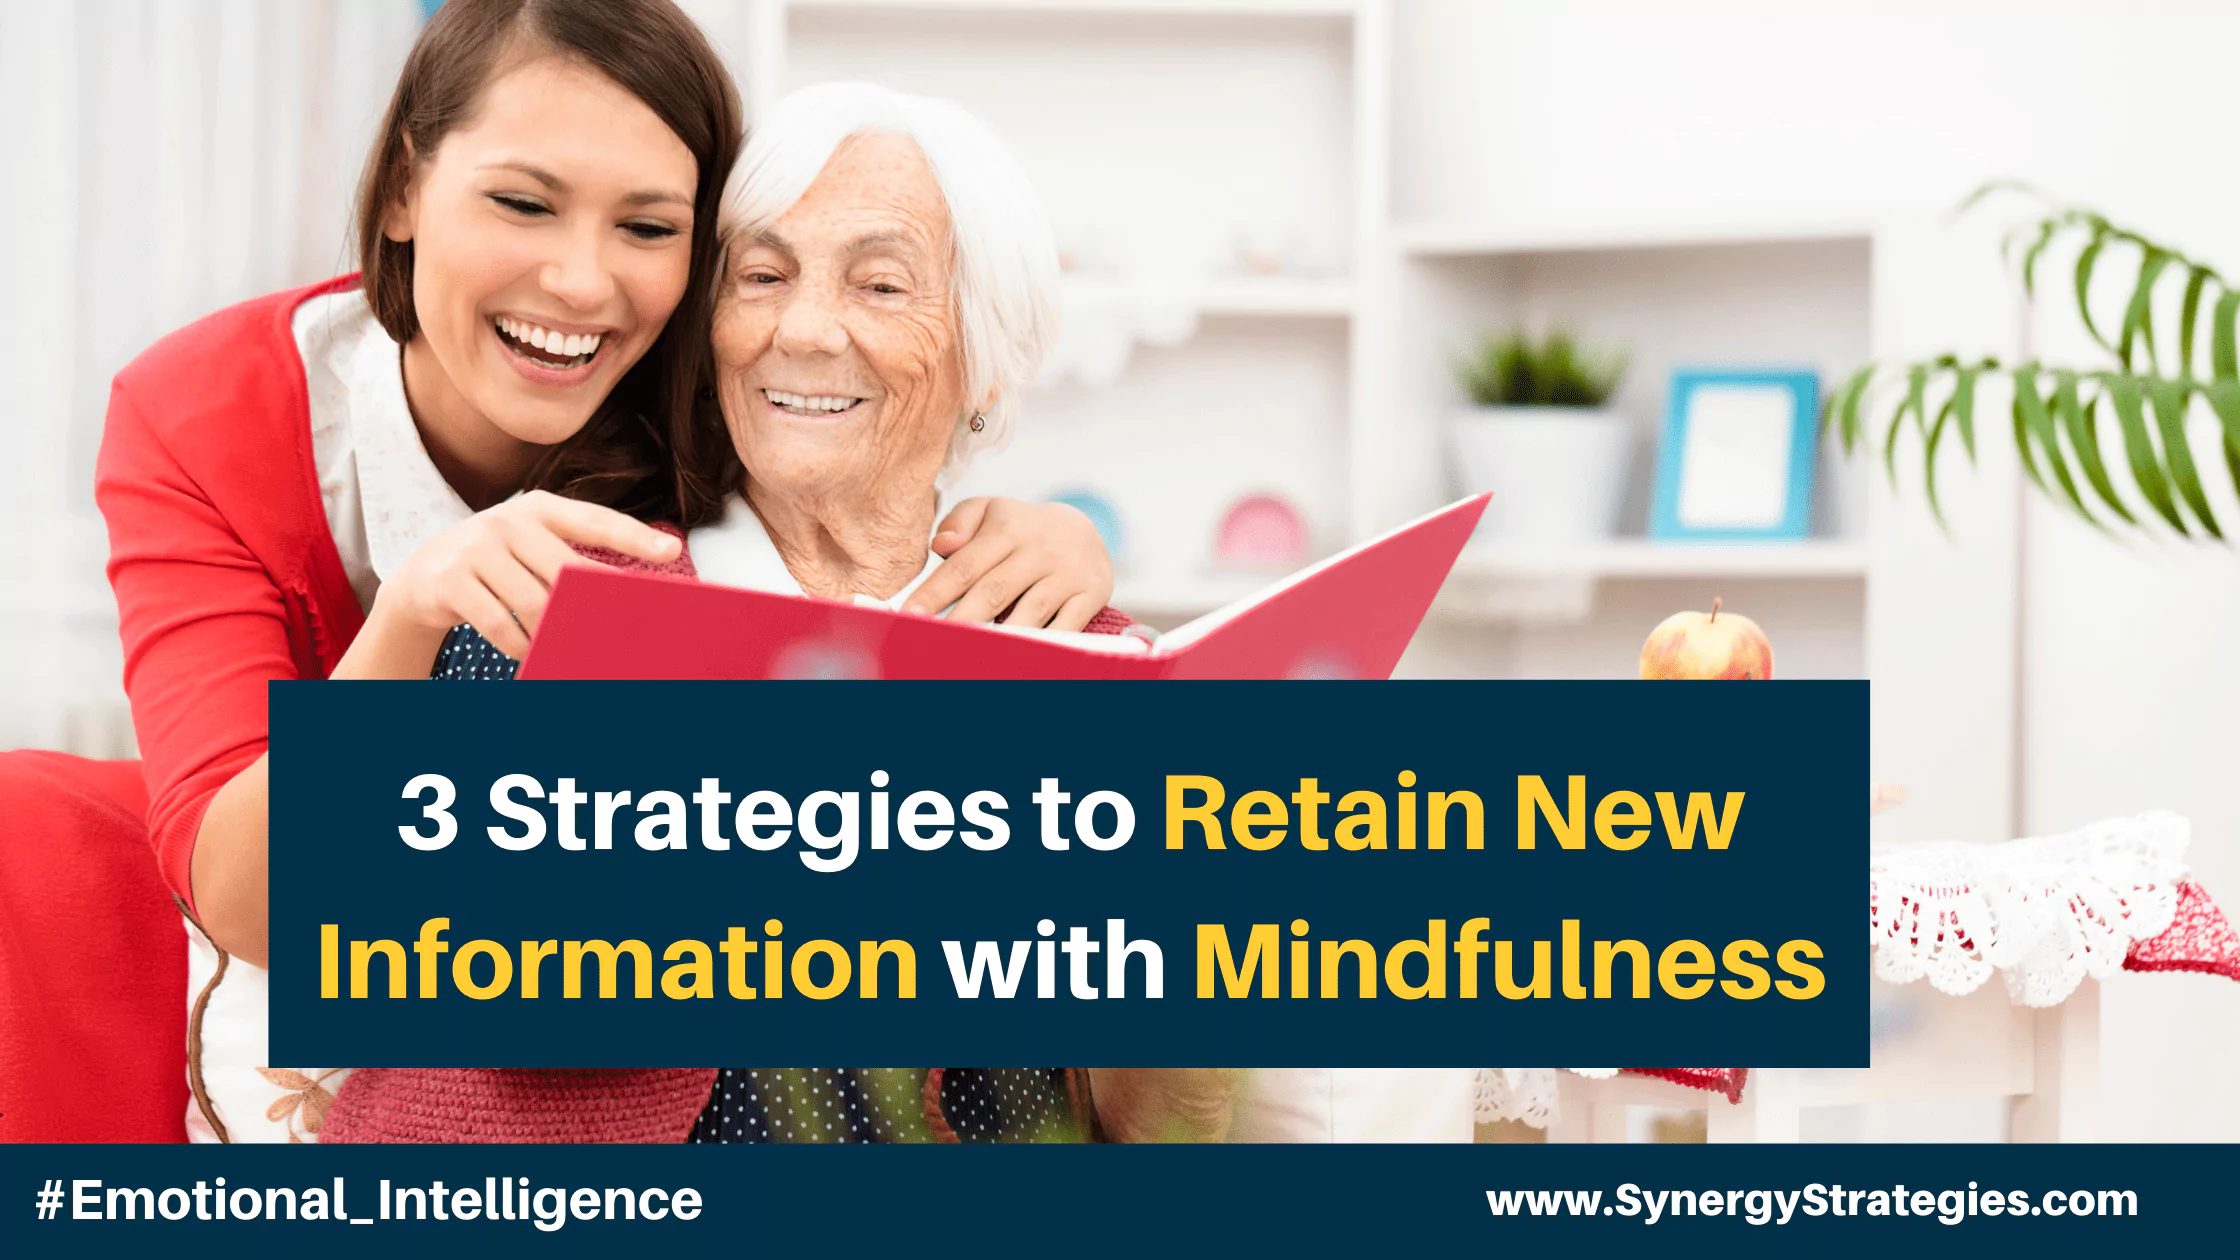 3 STRATEGIES TO RETAIN NEW INFORMATION WITH MINDFULNESS